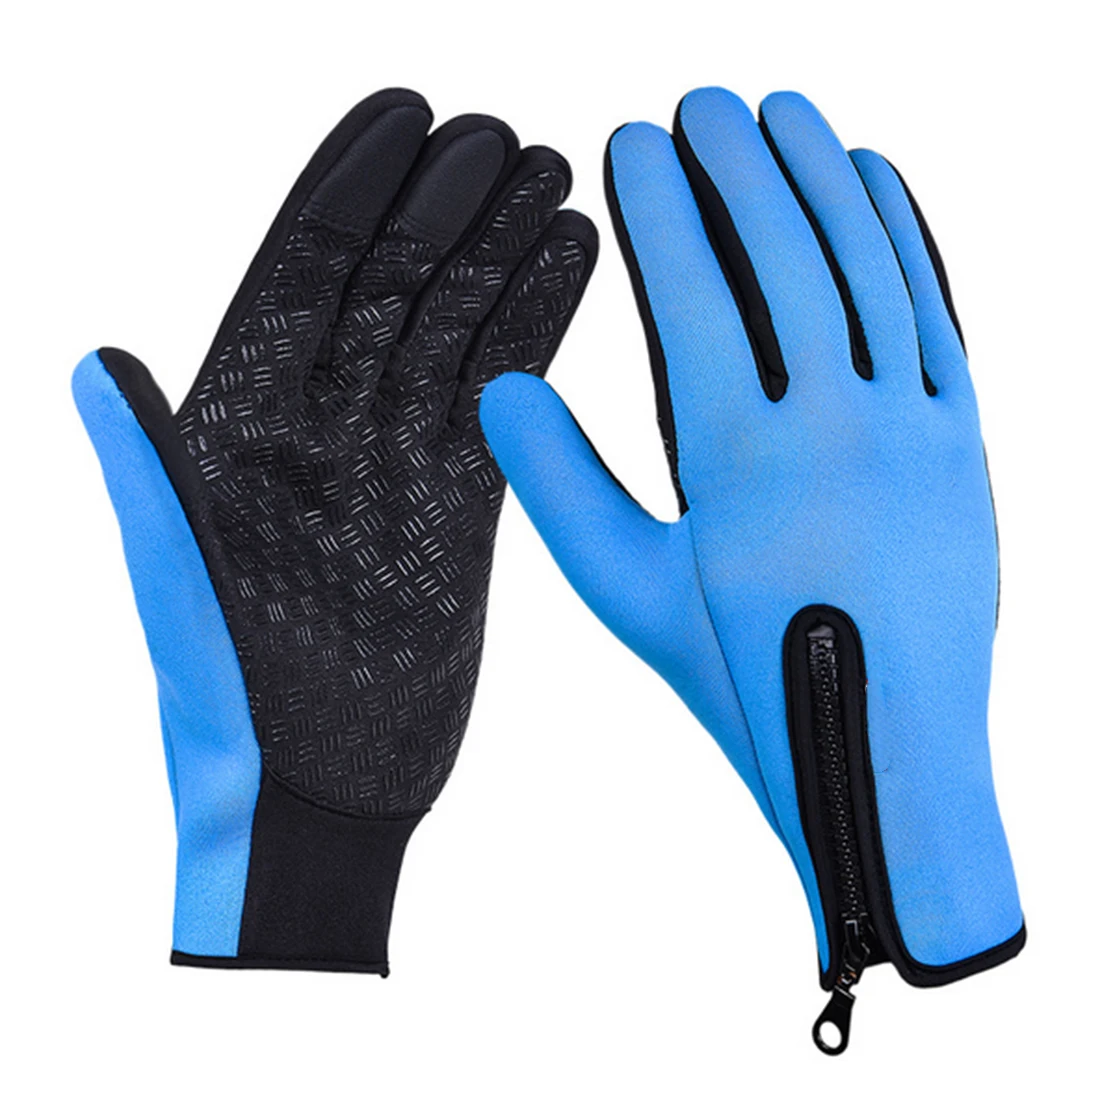 Winter Running Gloves Women Men Outdoor Sports Gloves Full Finger Outdoor Glove Breathable Cycling Casual Gloves 1 Pair New